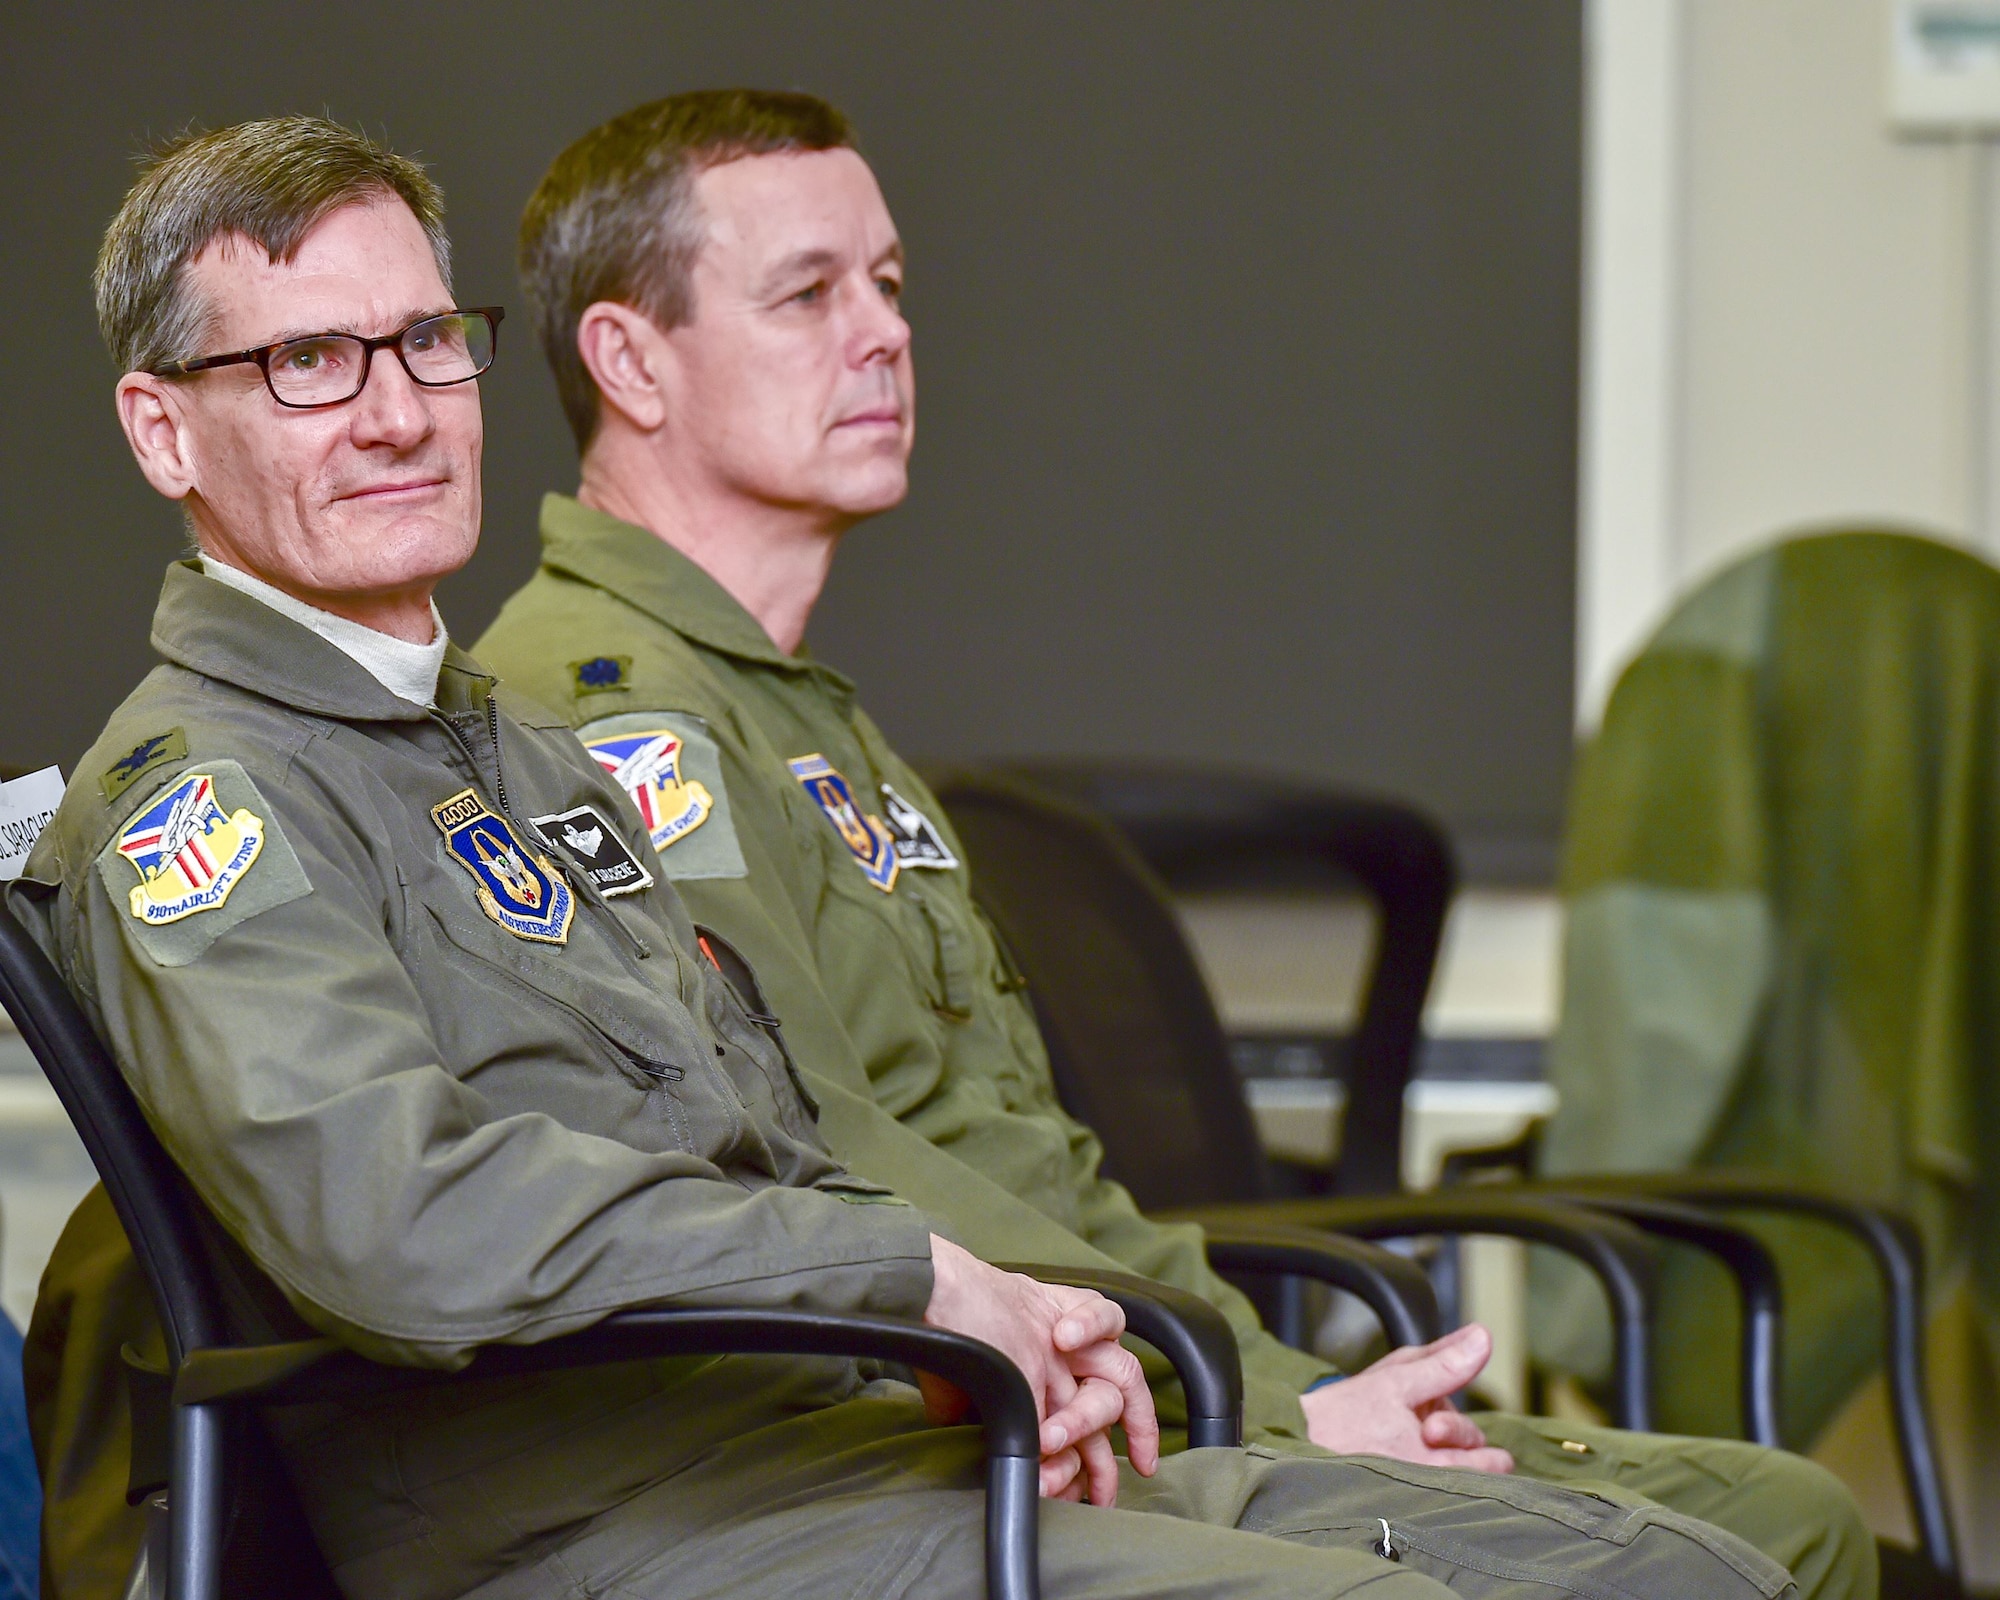 Col. Dan Sarachene, 910th Airlift Wing commander, and Lt. Col. Bart Elsea, 910th Airlift Wing Operations Group commander, listen as David Kubli, son of Fred Jr. and Laverne Kubli, gives remarks during a building dedication ceremony honoring Fred here, Dec. 15, 2017.